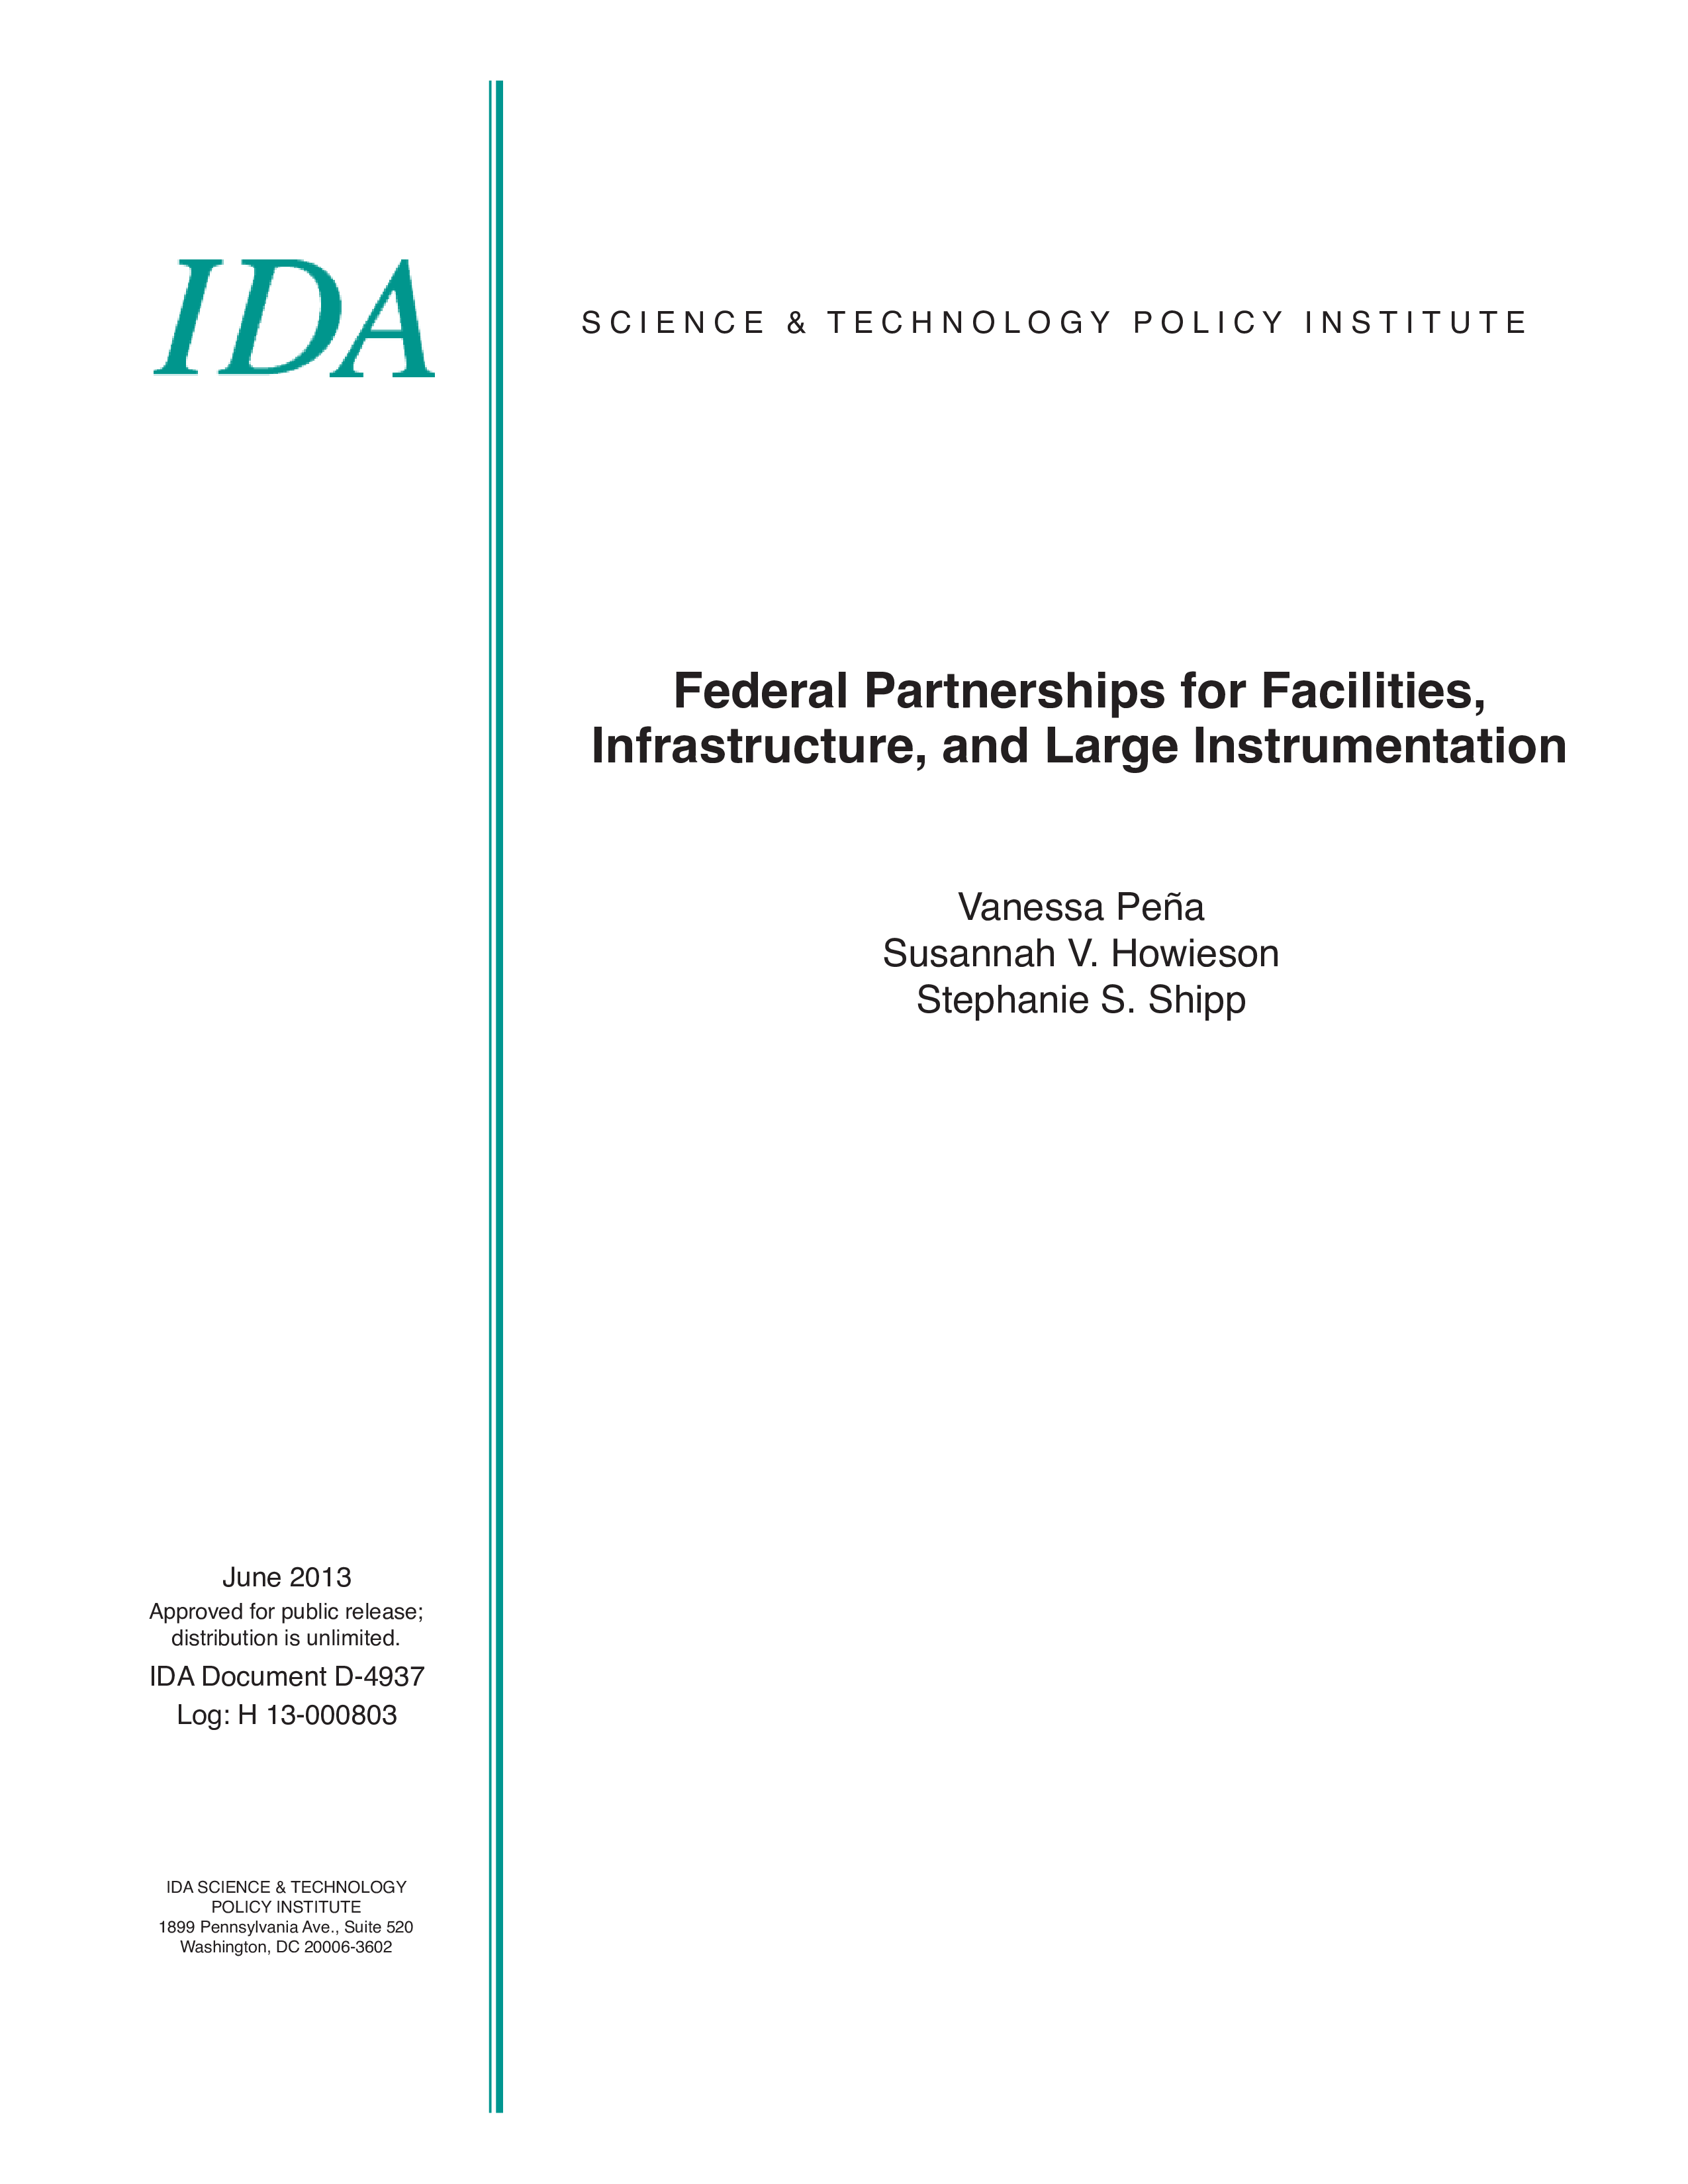 Federal Partnerships for Facilities, Infrastructure, and Large Instrumentation